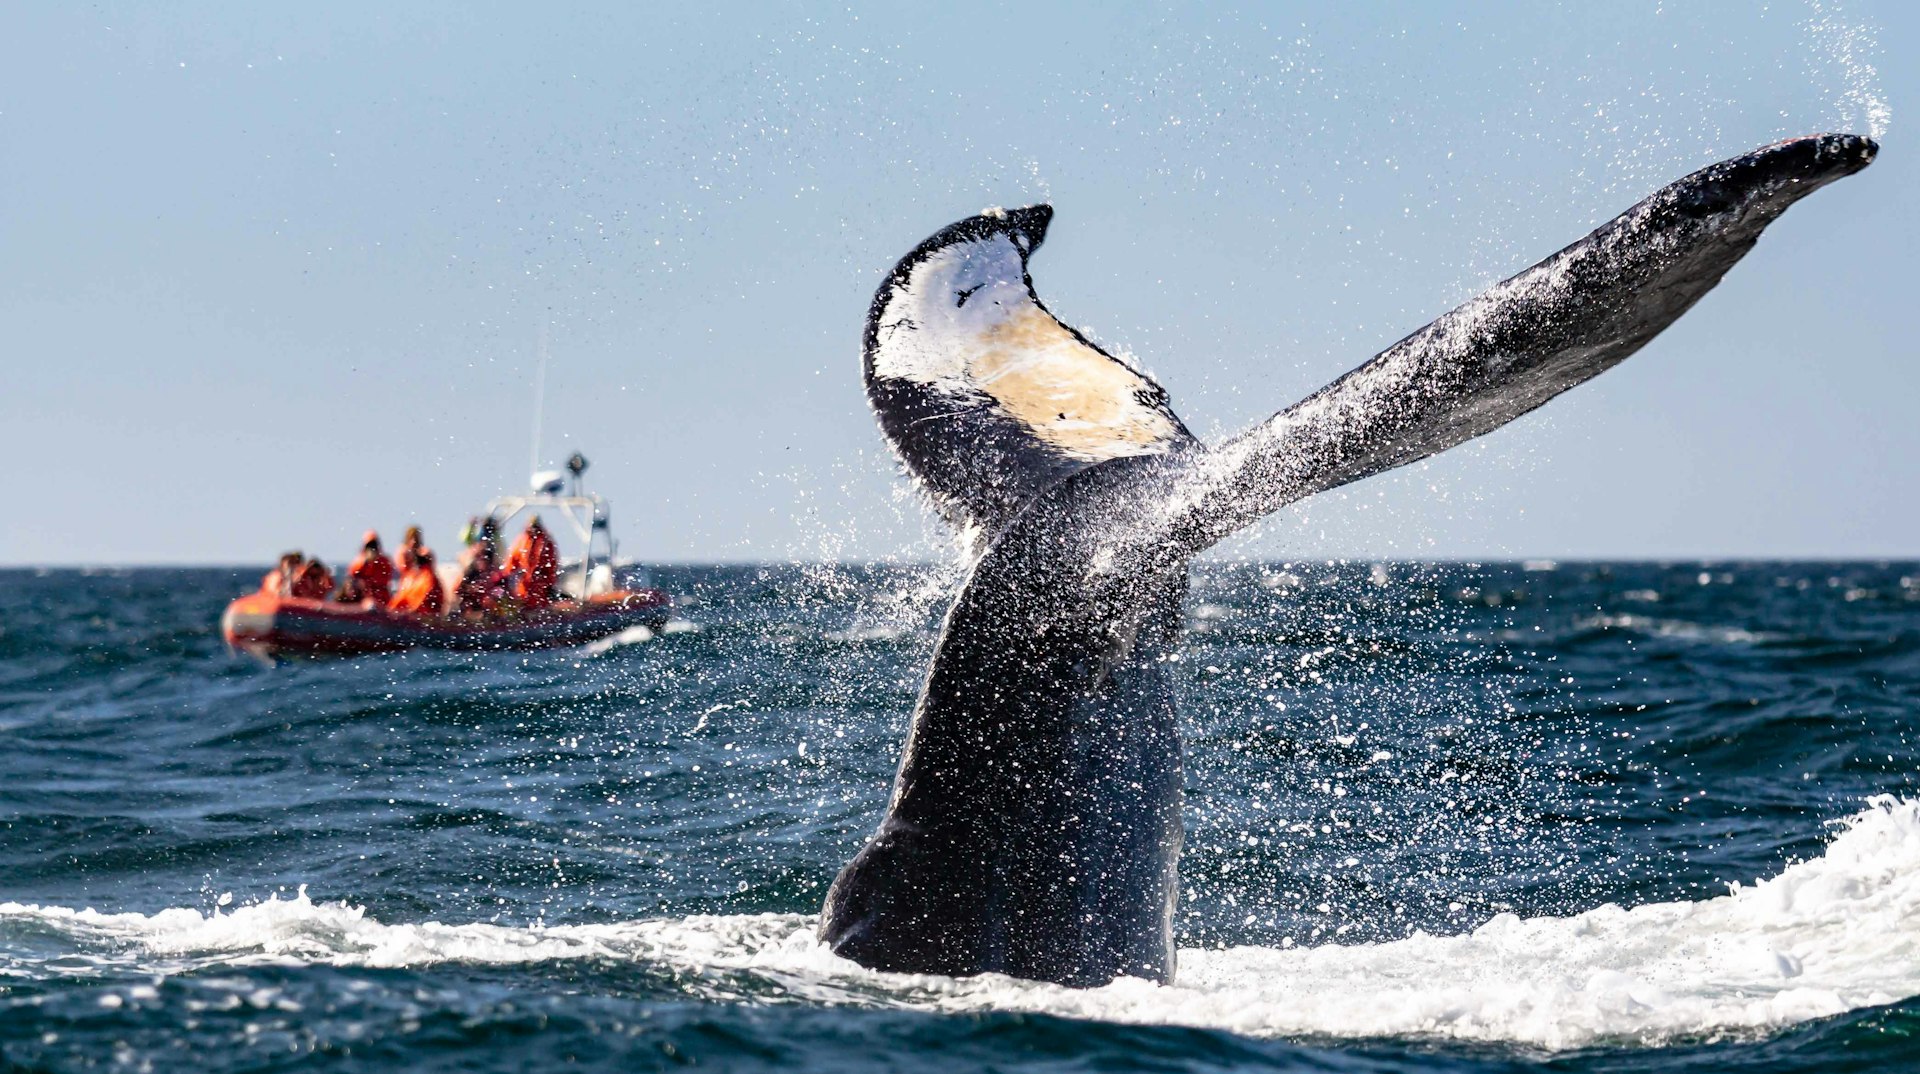 People watch the tail of a whale from a boat off the coast of Brier Island, Nova Scotia, Canada